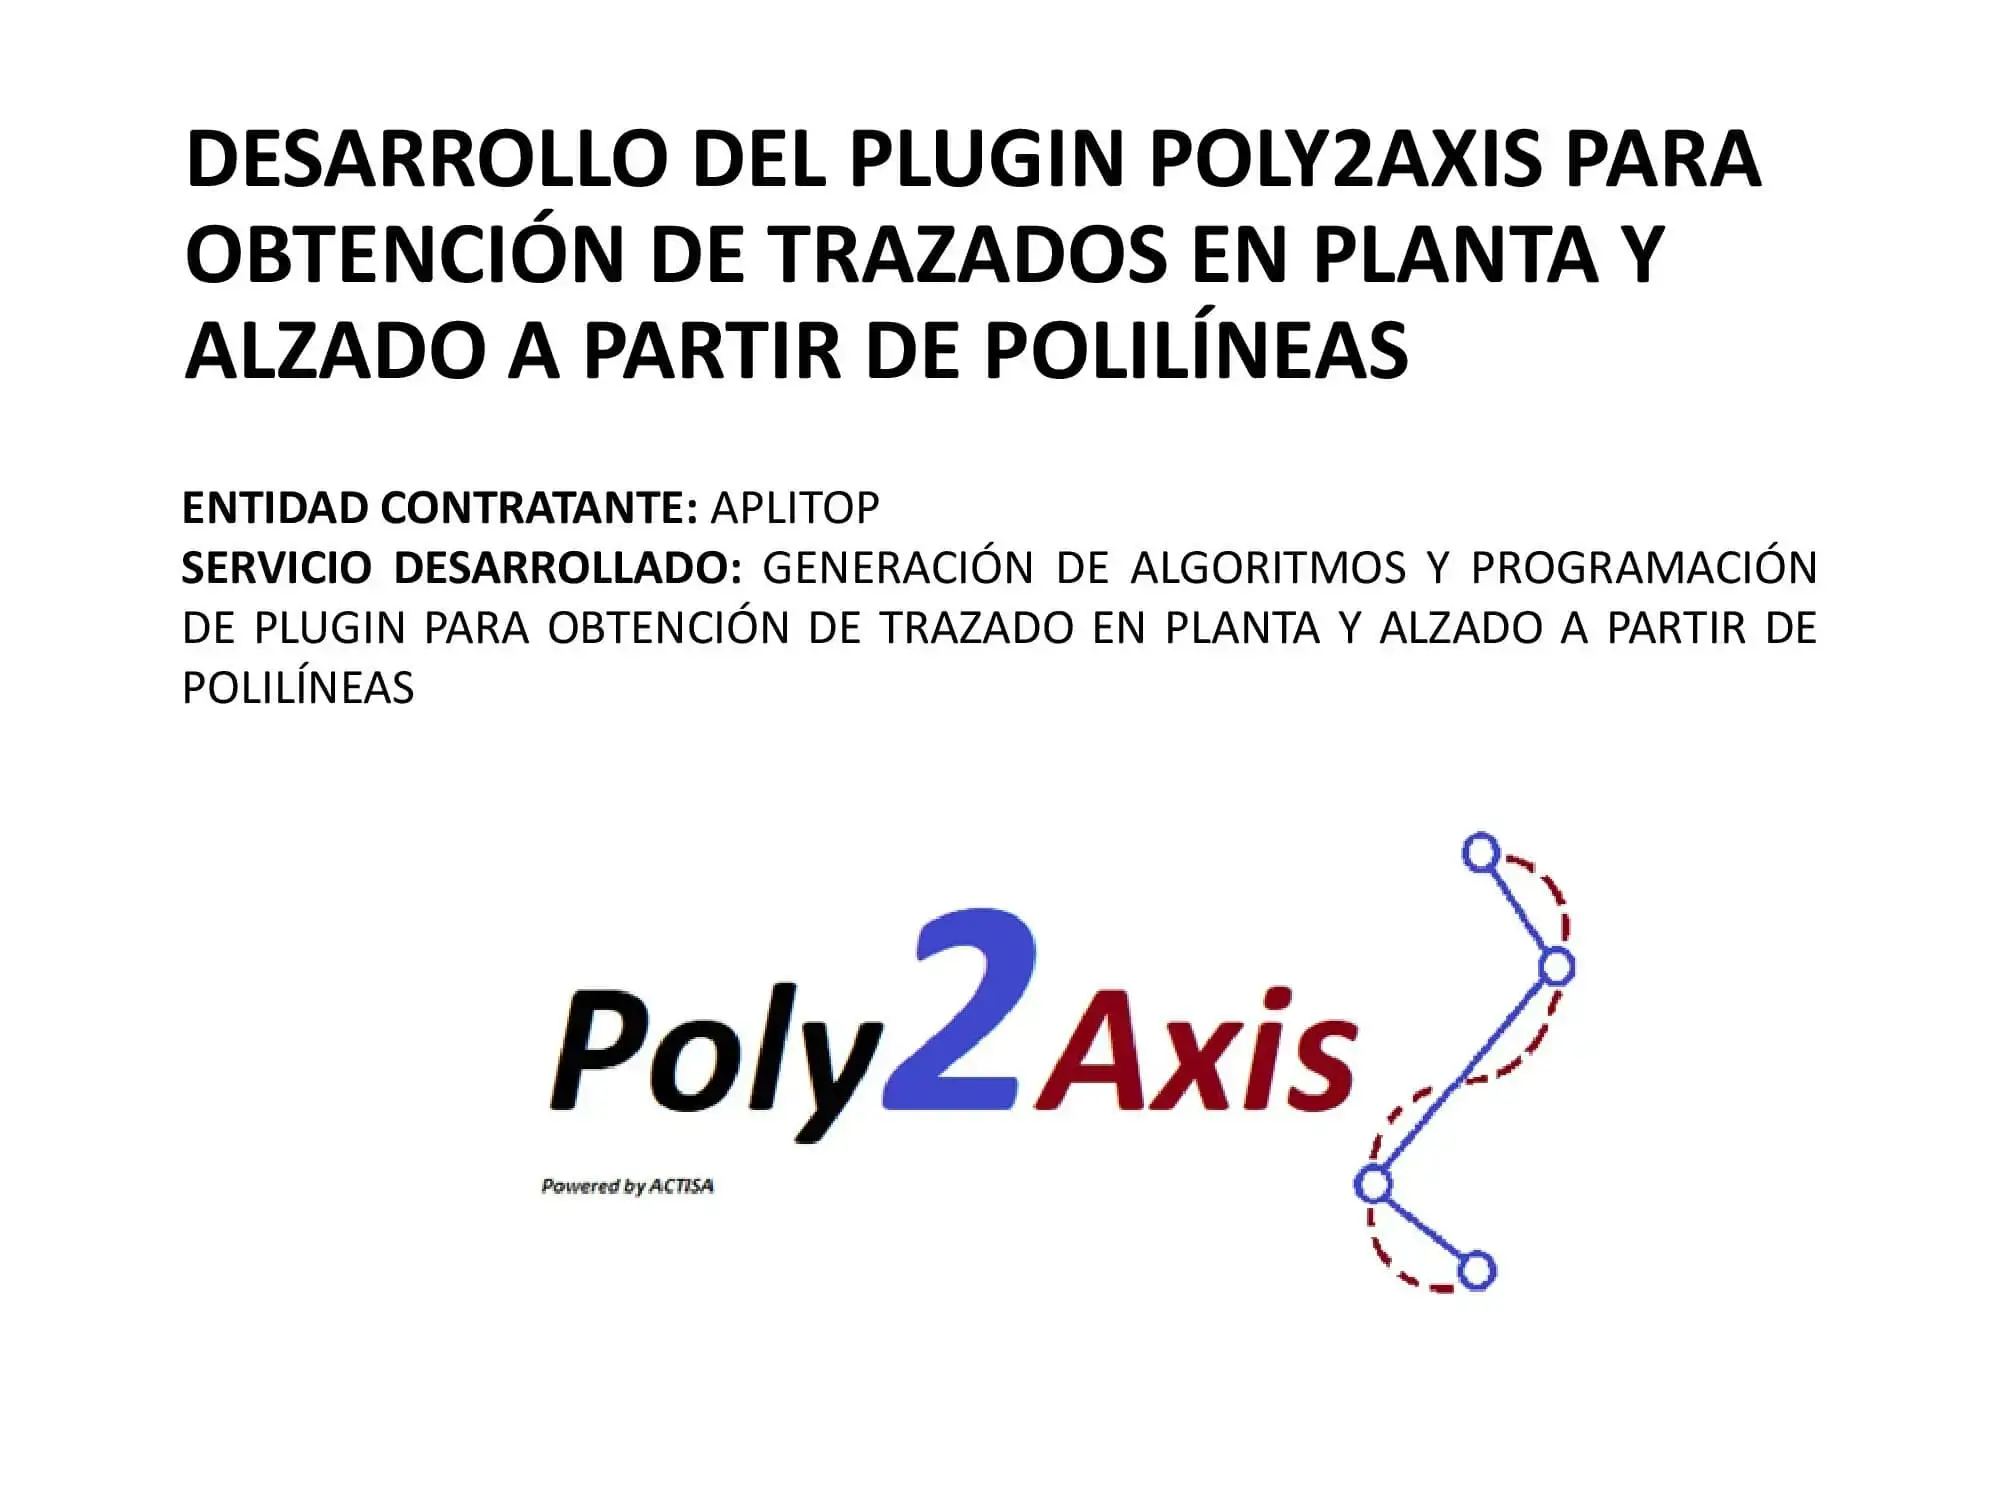 POLY2AXIS01